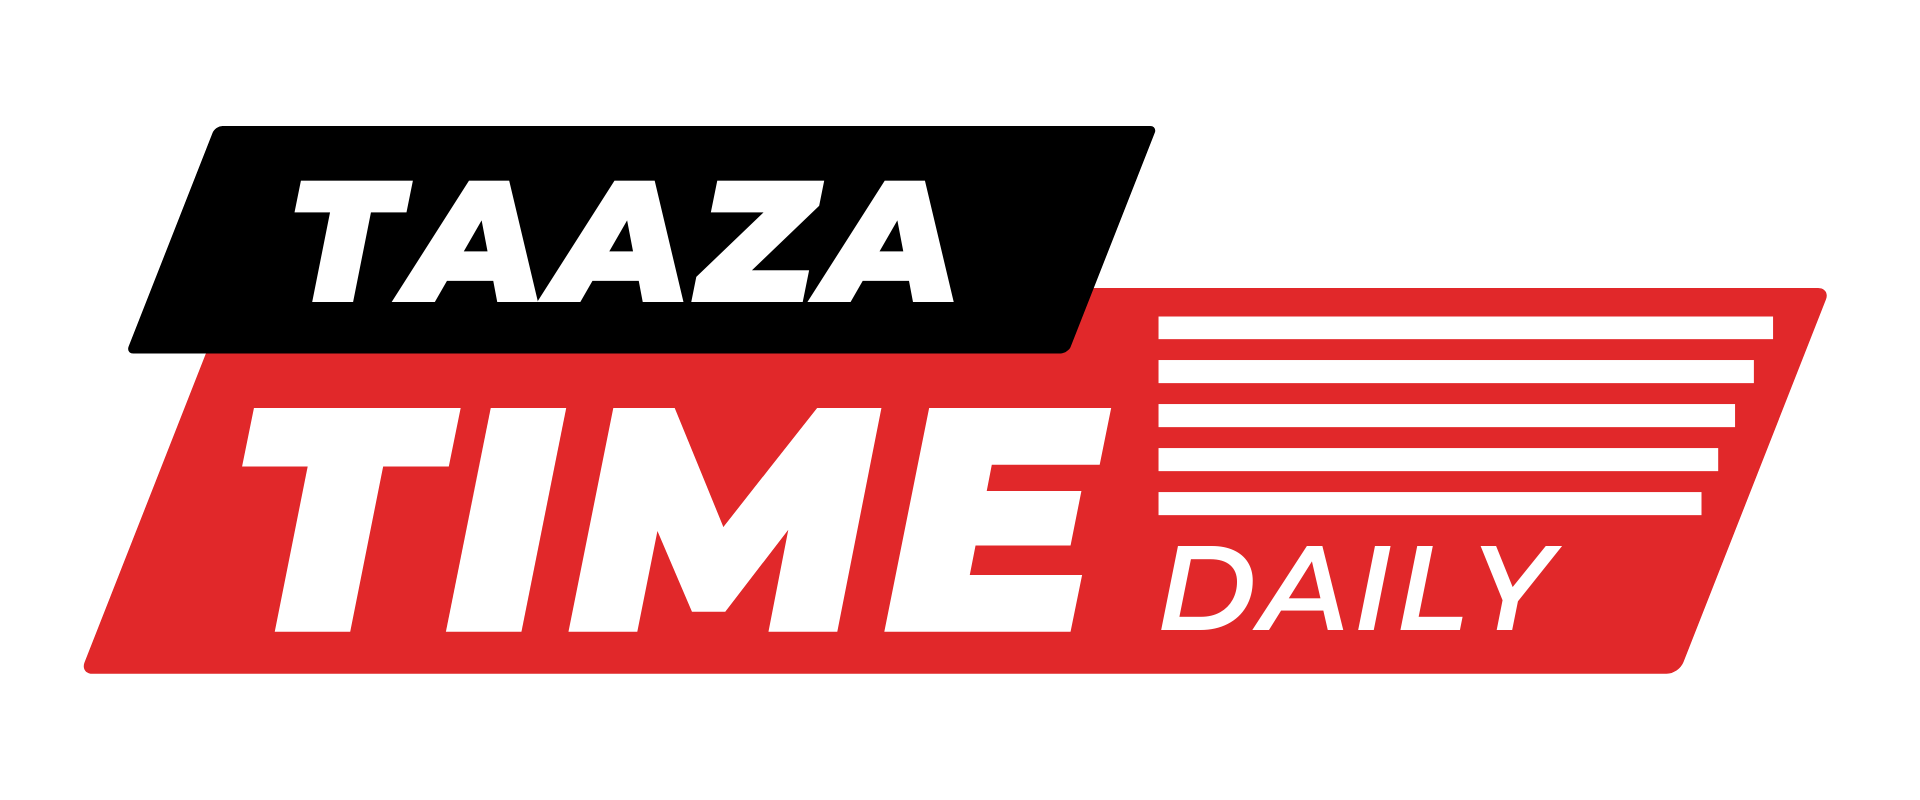 Taaza Time Daily